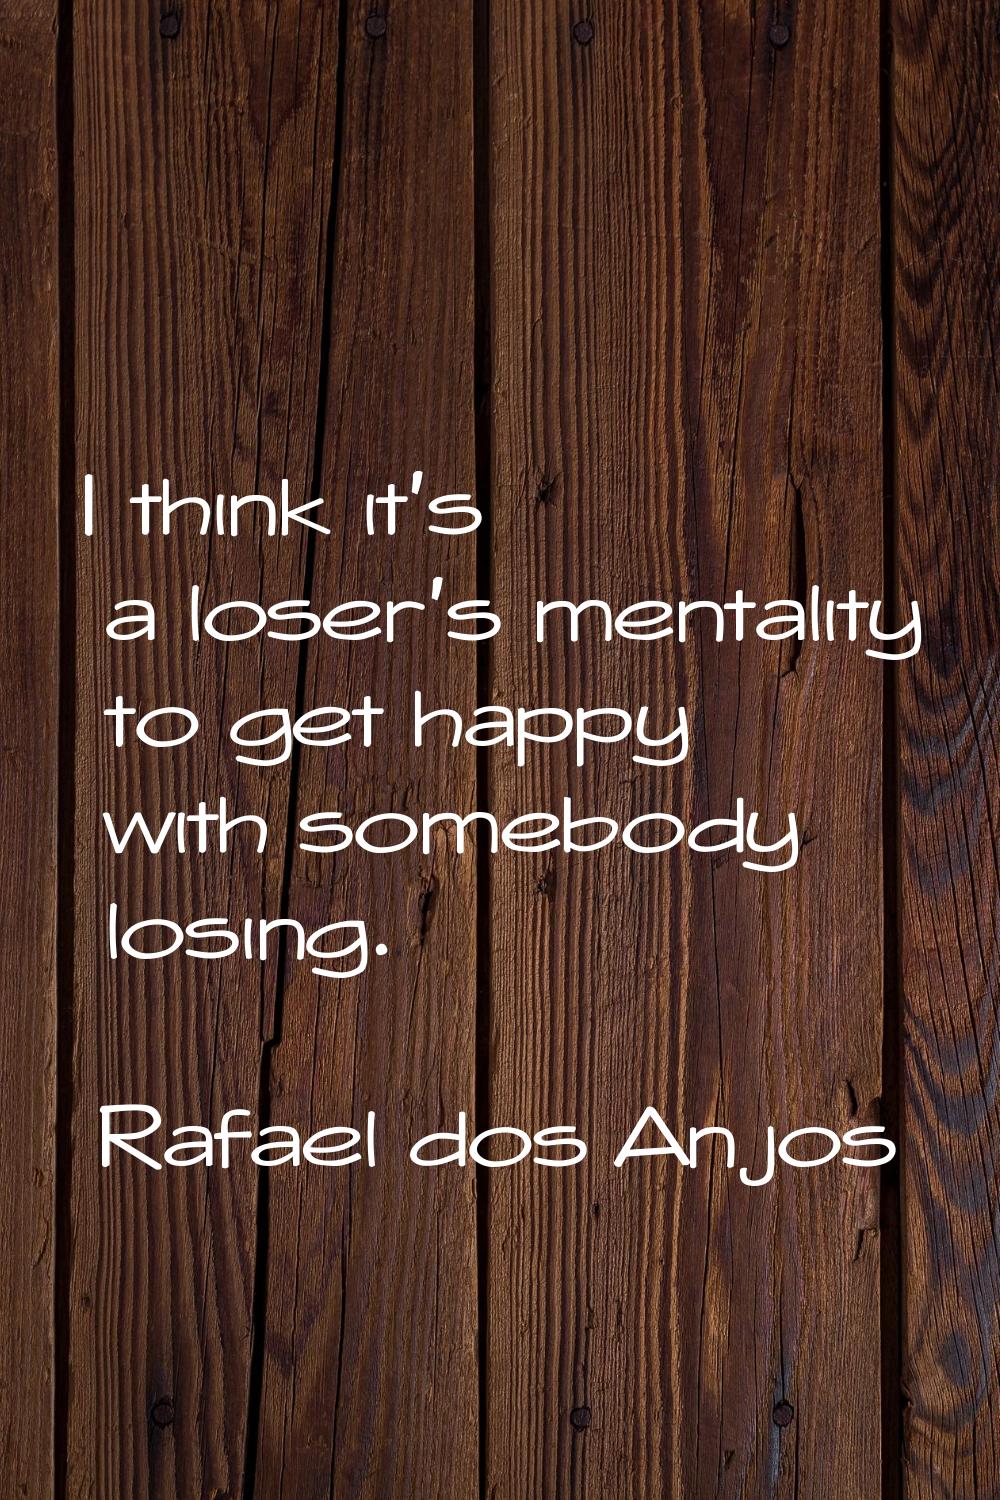 I think it's a loser's mentality to get happy with somebody losing.